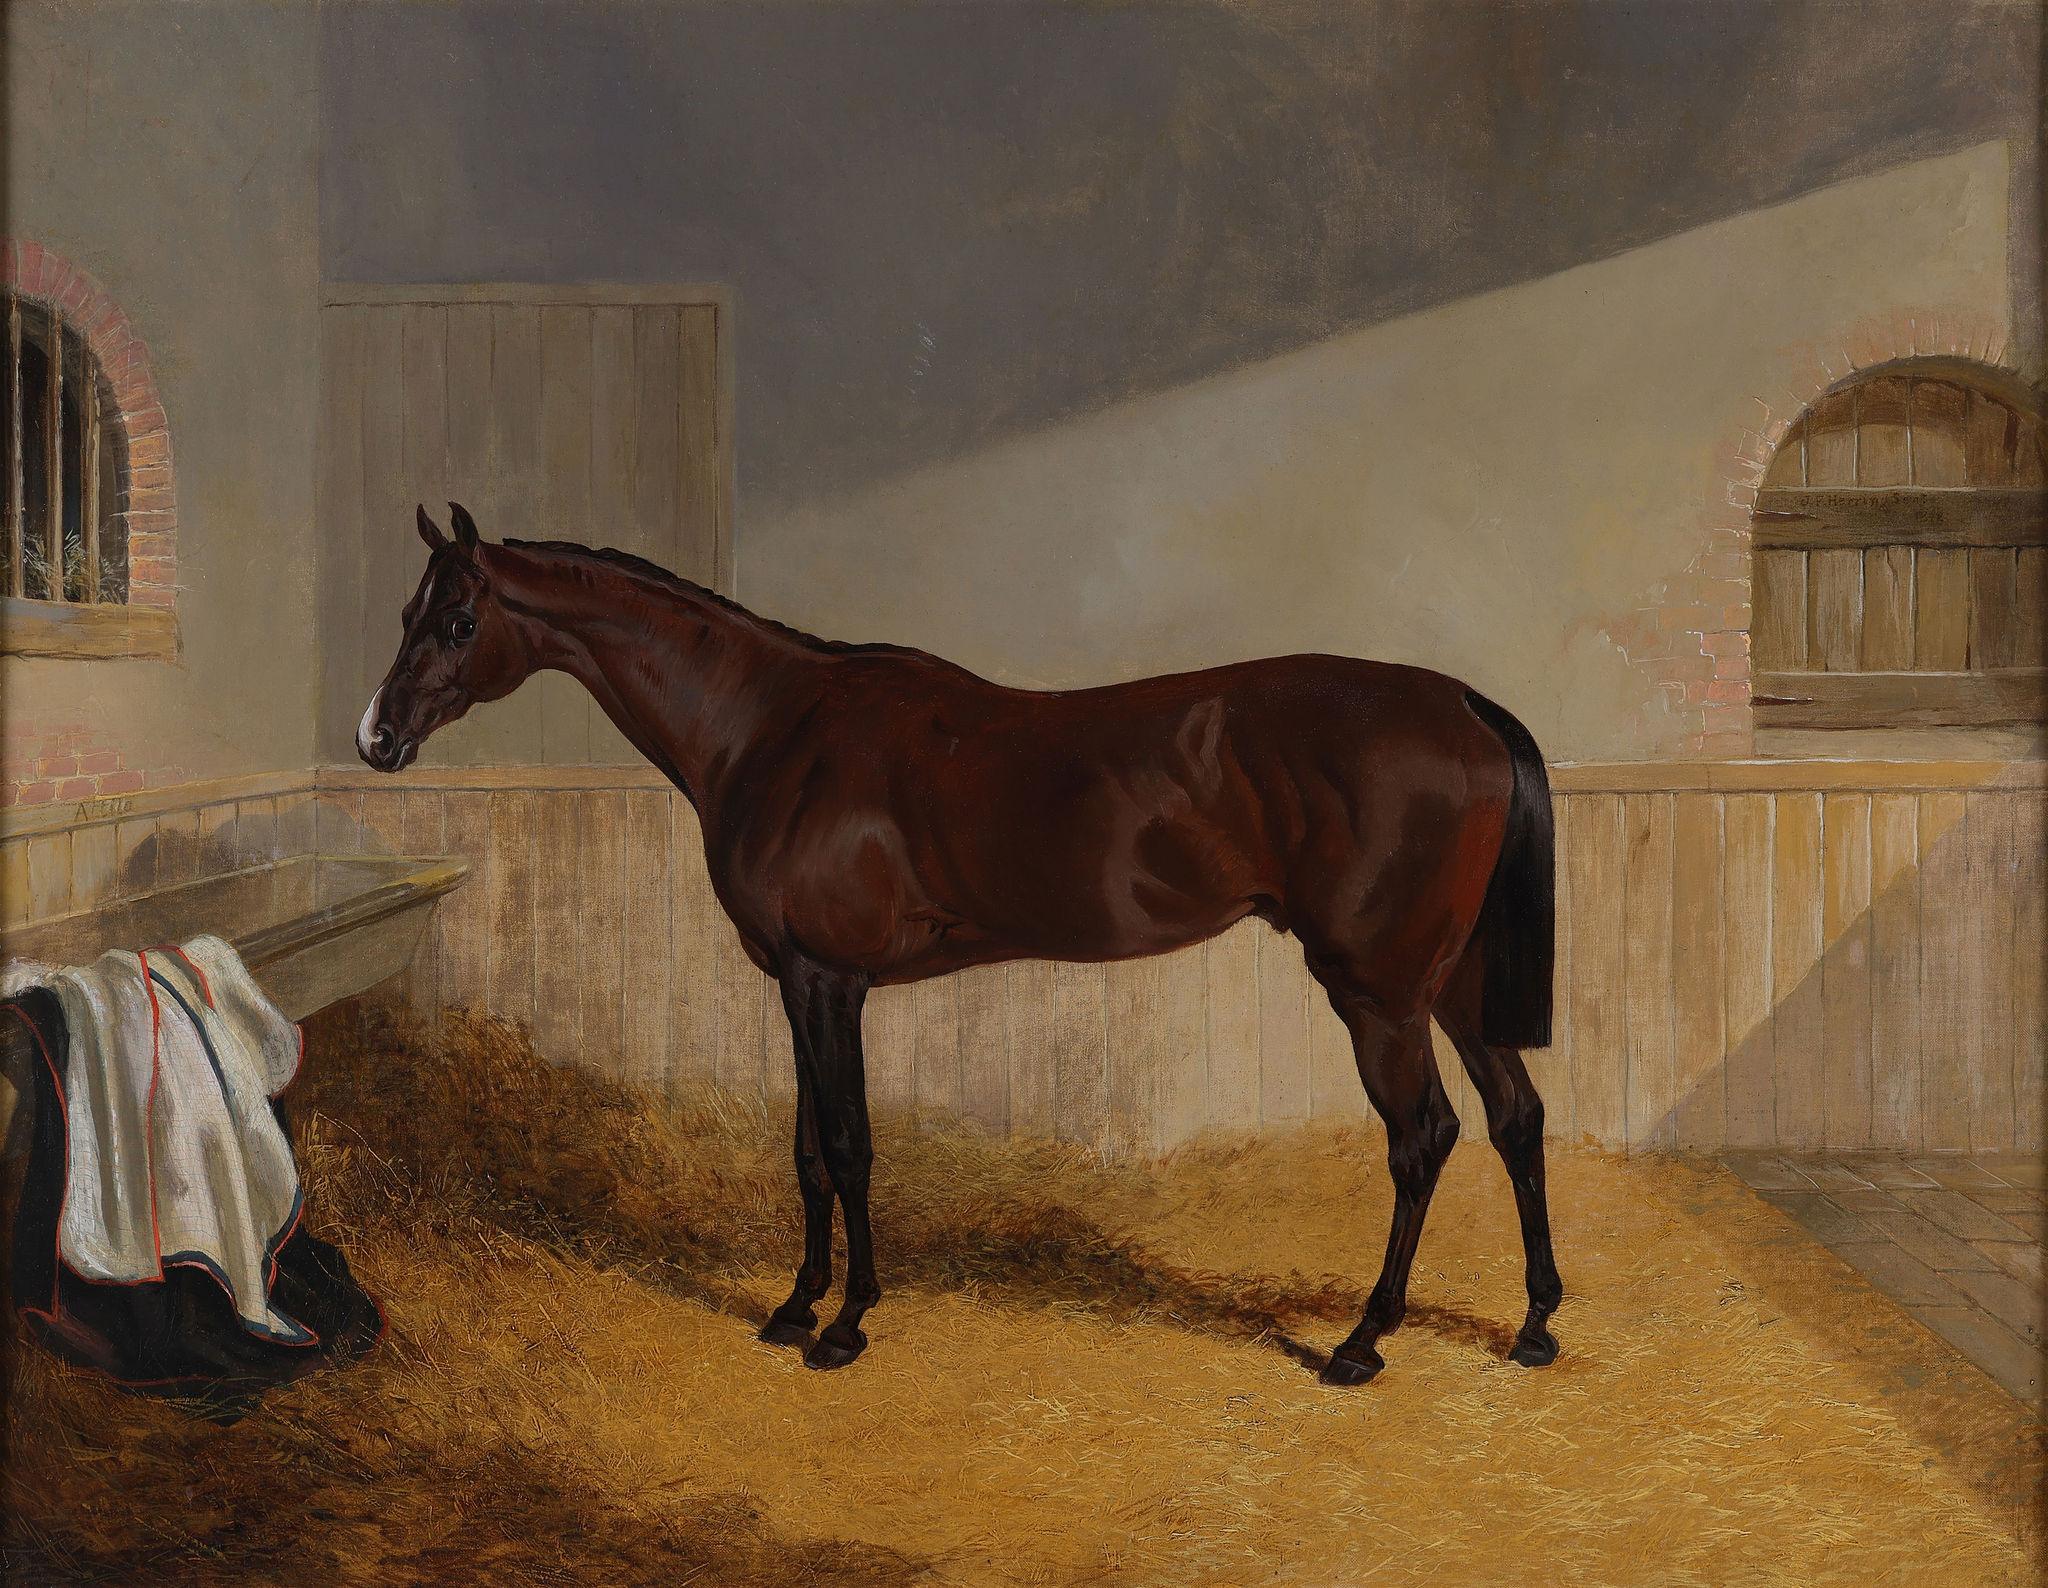 'Attilla' A Chestnut Horse in a Stable - Painting by John Frederick Herring Sr.